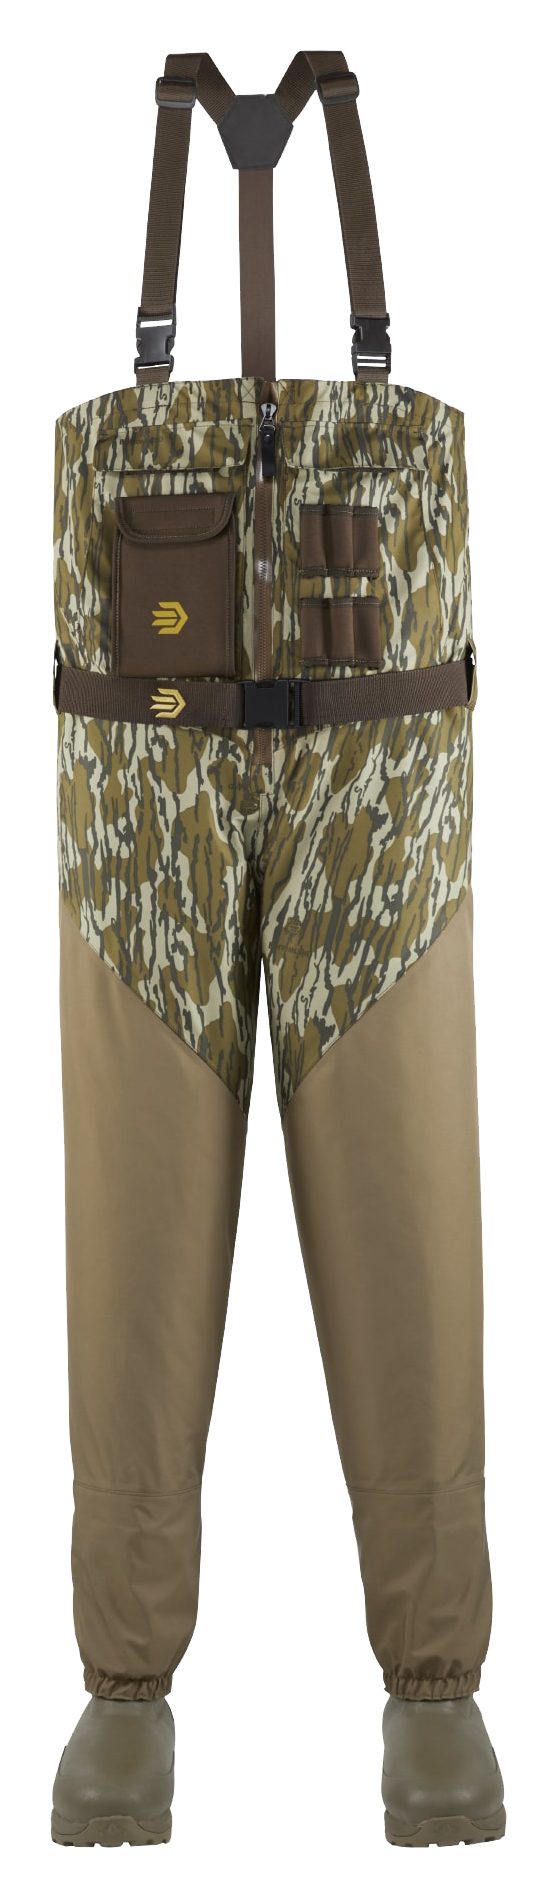 LaCrosse Alpha Agility Select Insulated Front-Zip Breathable Hunting Waders for Men - Mossy Oak Original Bottomland - 10/Medium